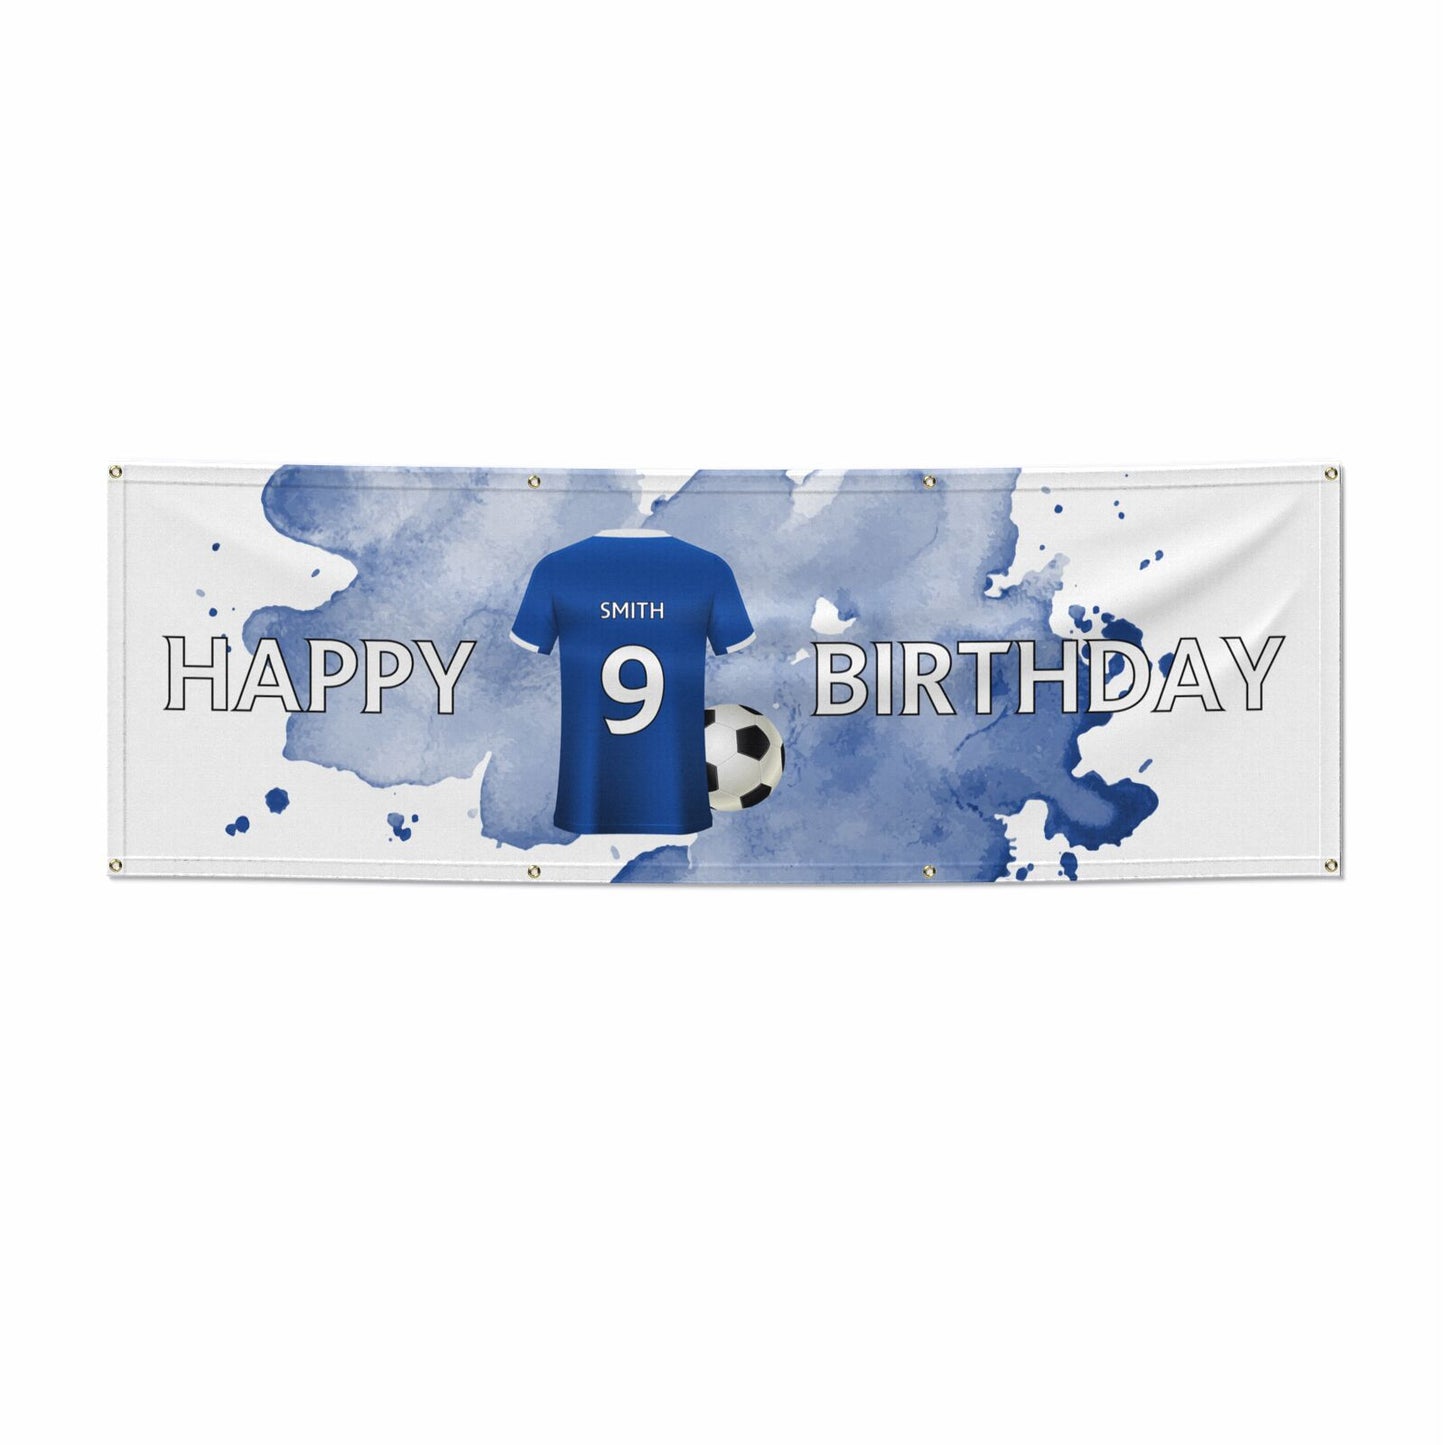 Blue Personalised Name Football Shirt 6x2 Vinly Banner with Grommets